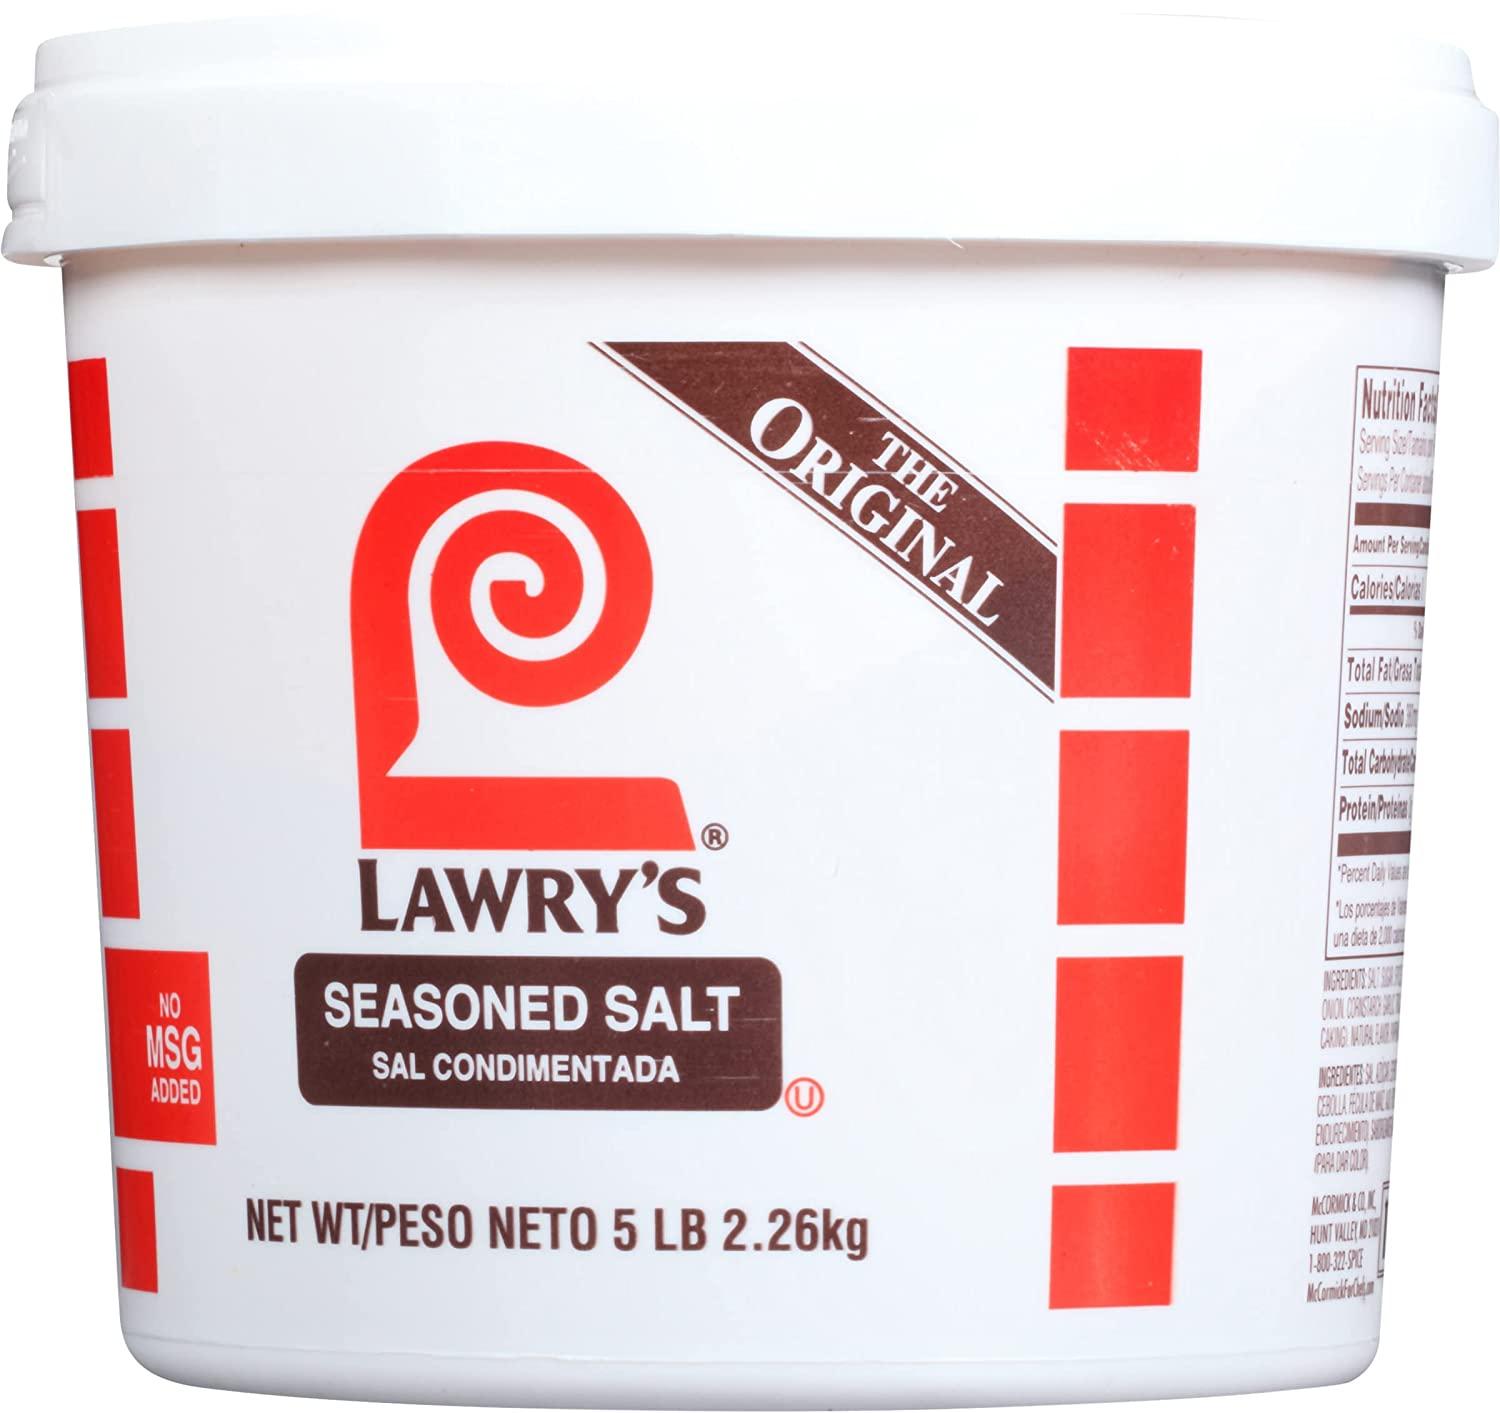  Lawry's Seasoned Salt, 5 lb - One 5 Pound Container of  All-Purpose Seasoned Salt Made With Perfect Blend of Salt, Garlic,  Turmeric, Celery, Paprika and Other Spices : Flavored Salt 